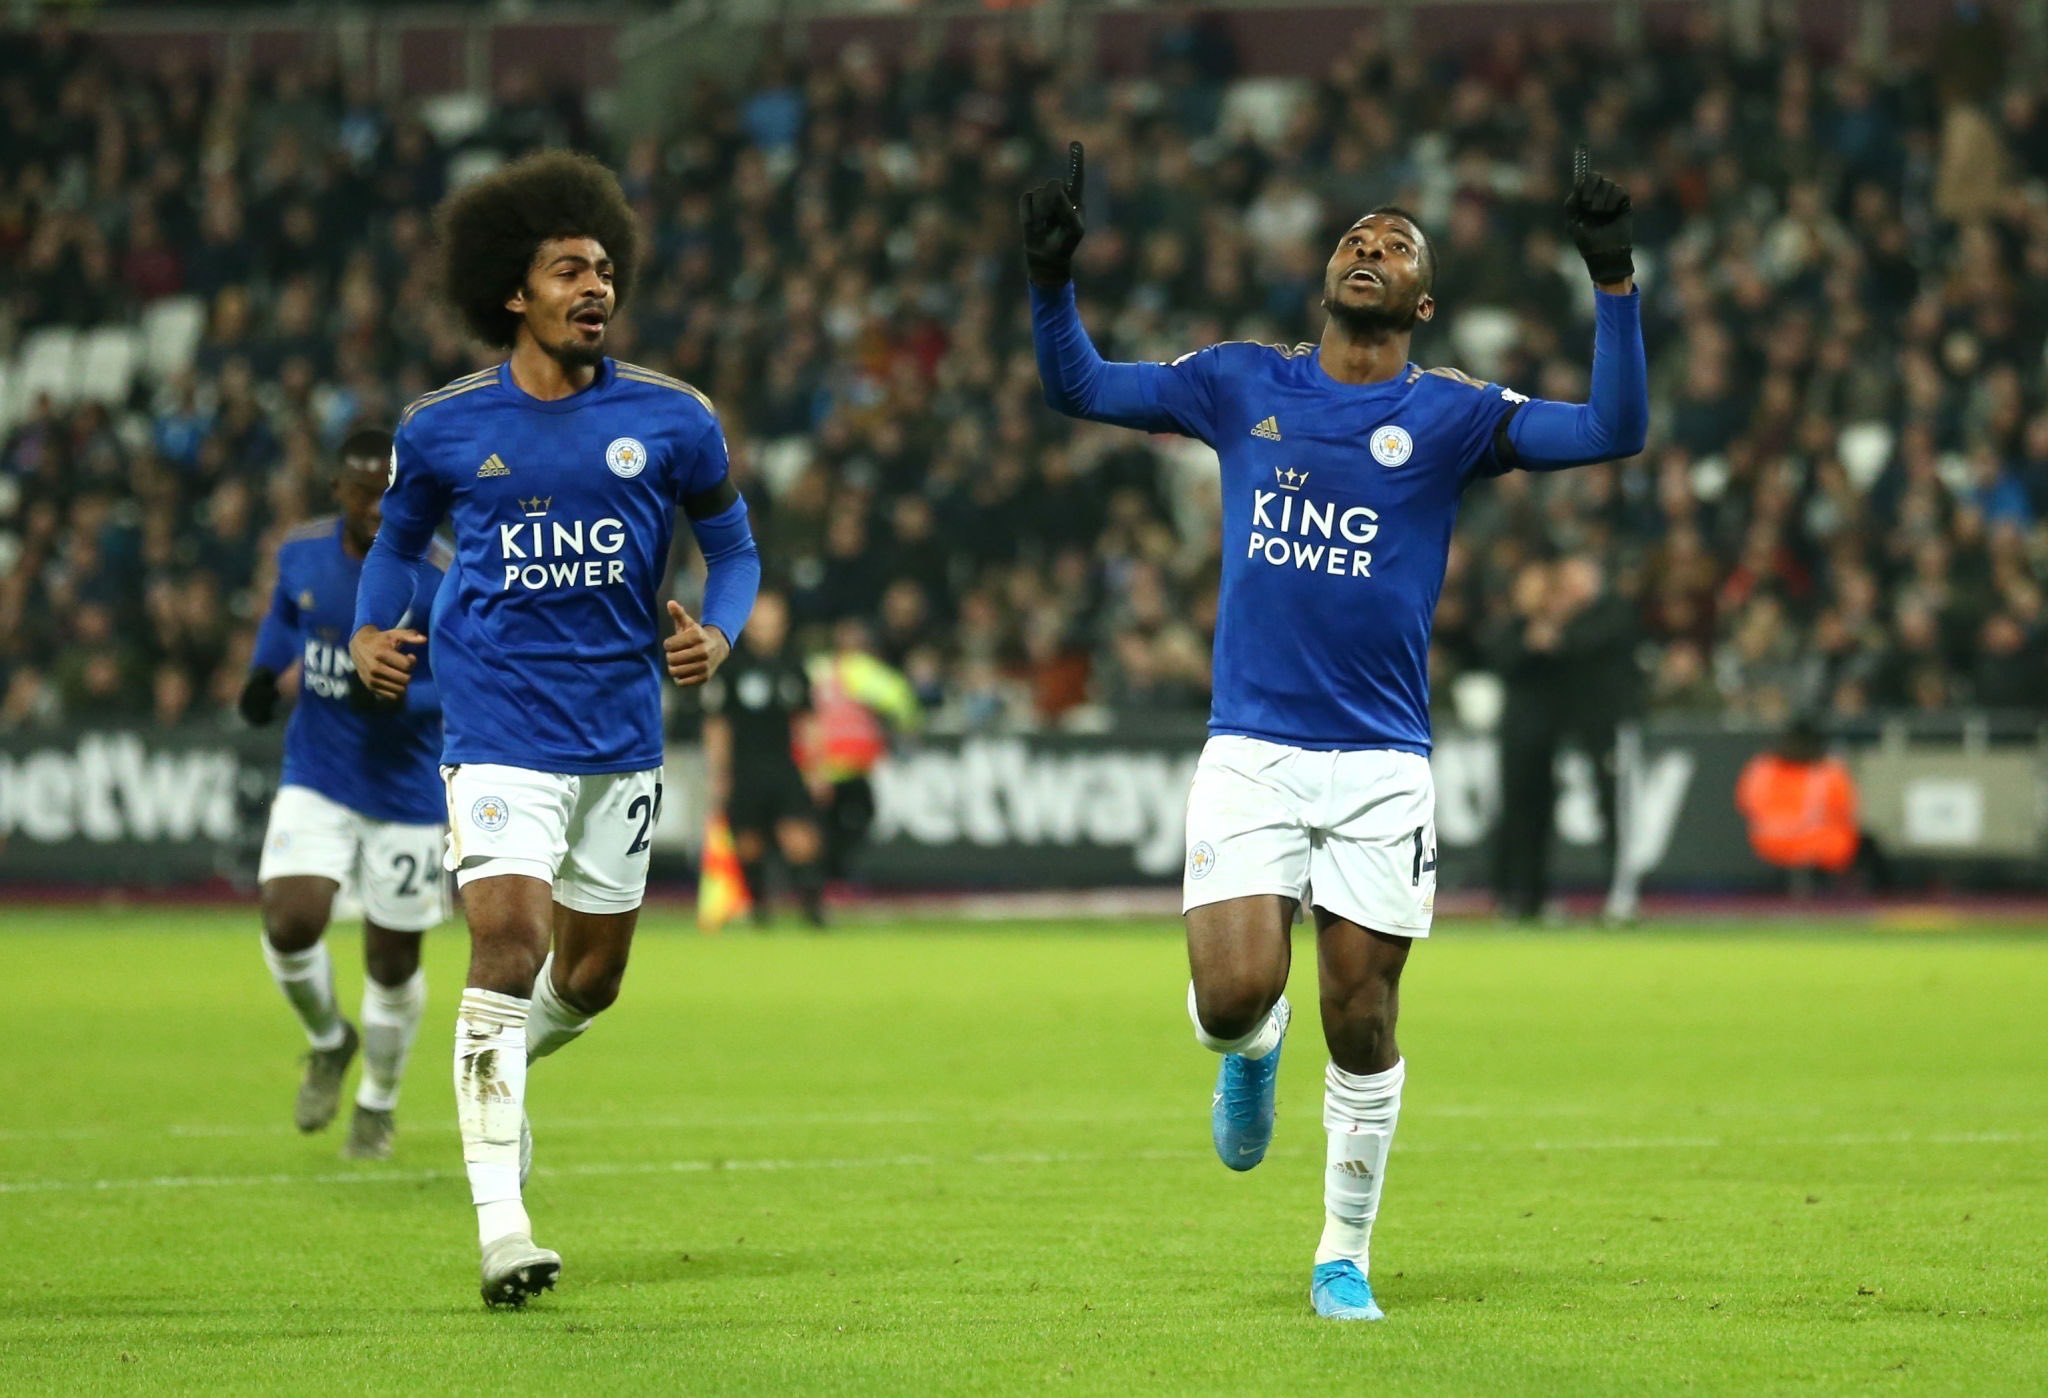 Iheanacho On Target In Leicester Win At West Ham; Spurs Force Norwich To Draw